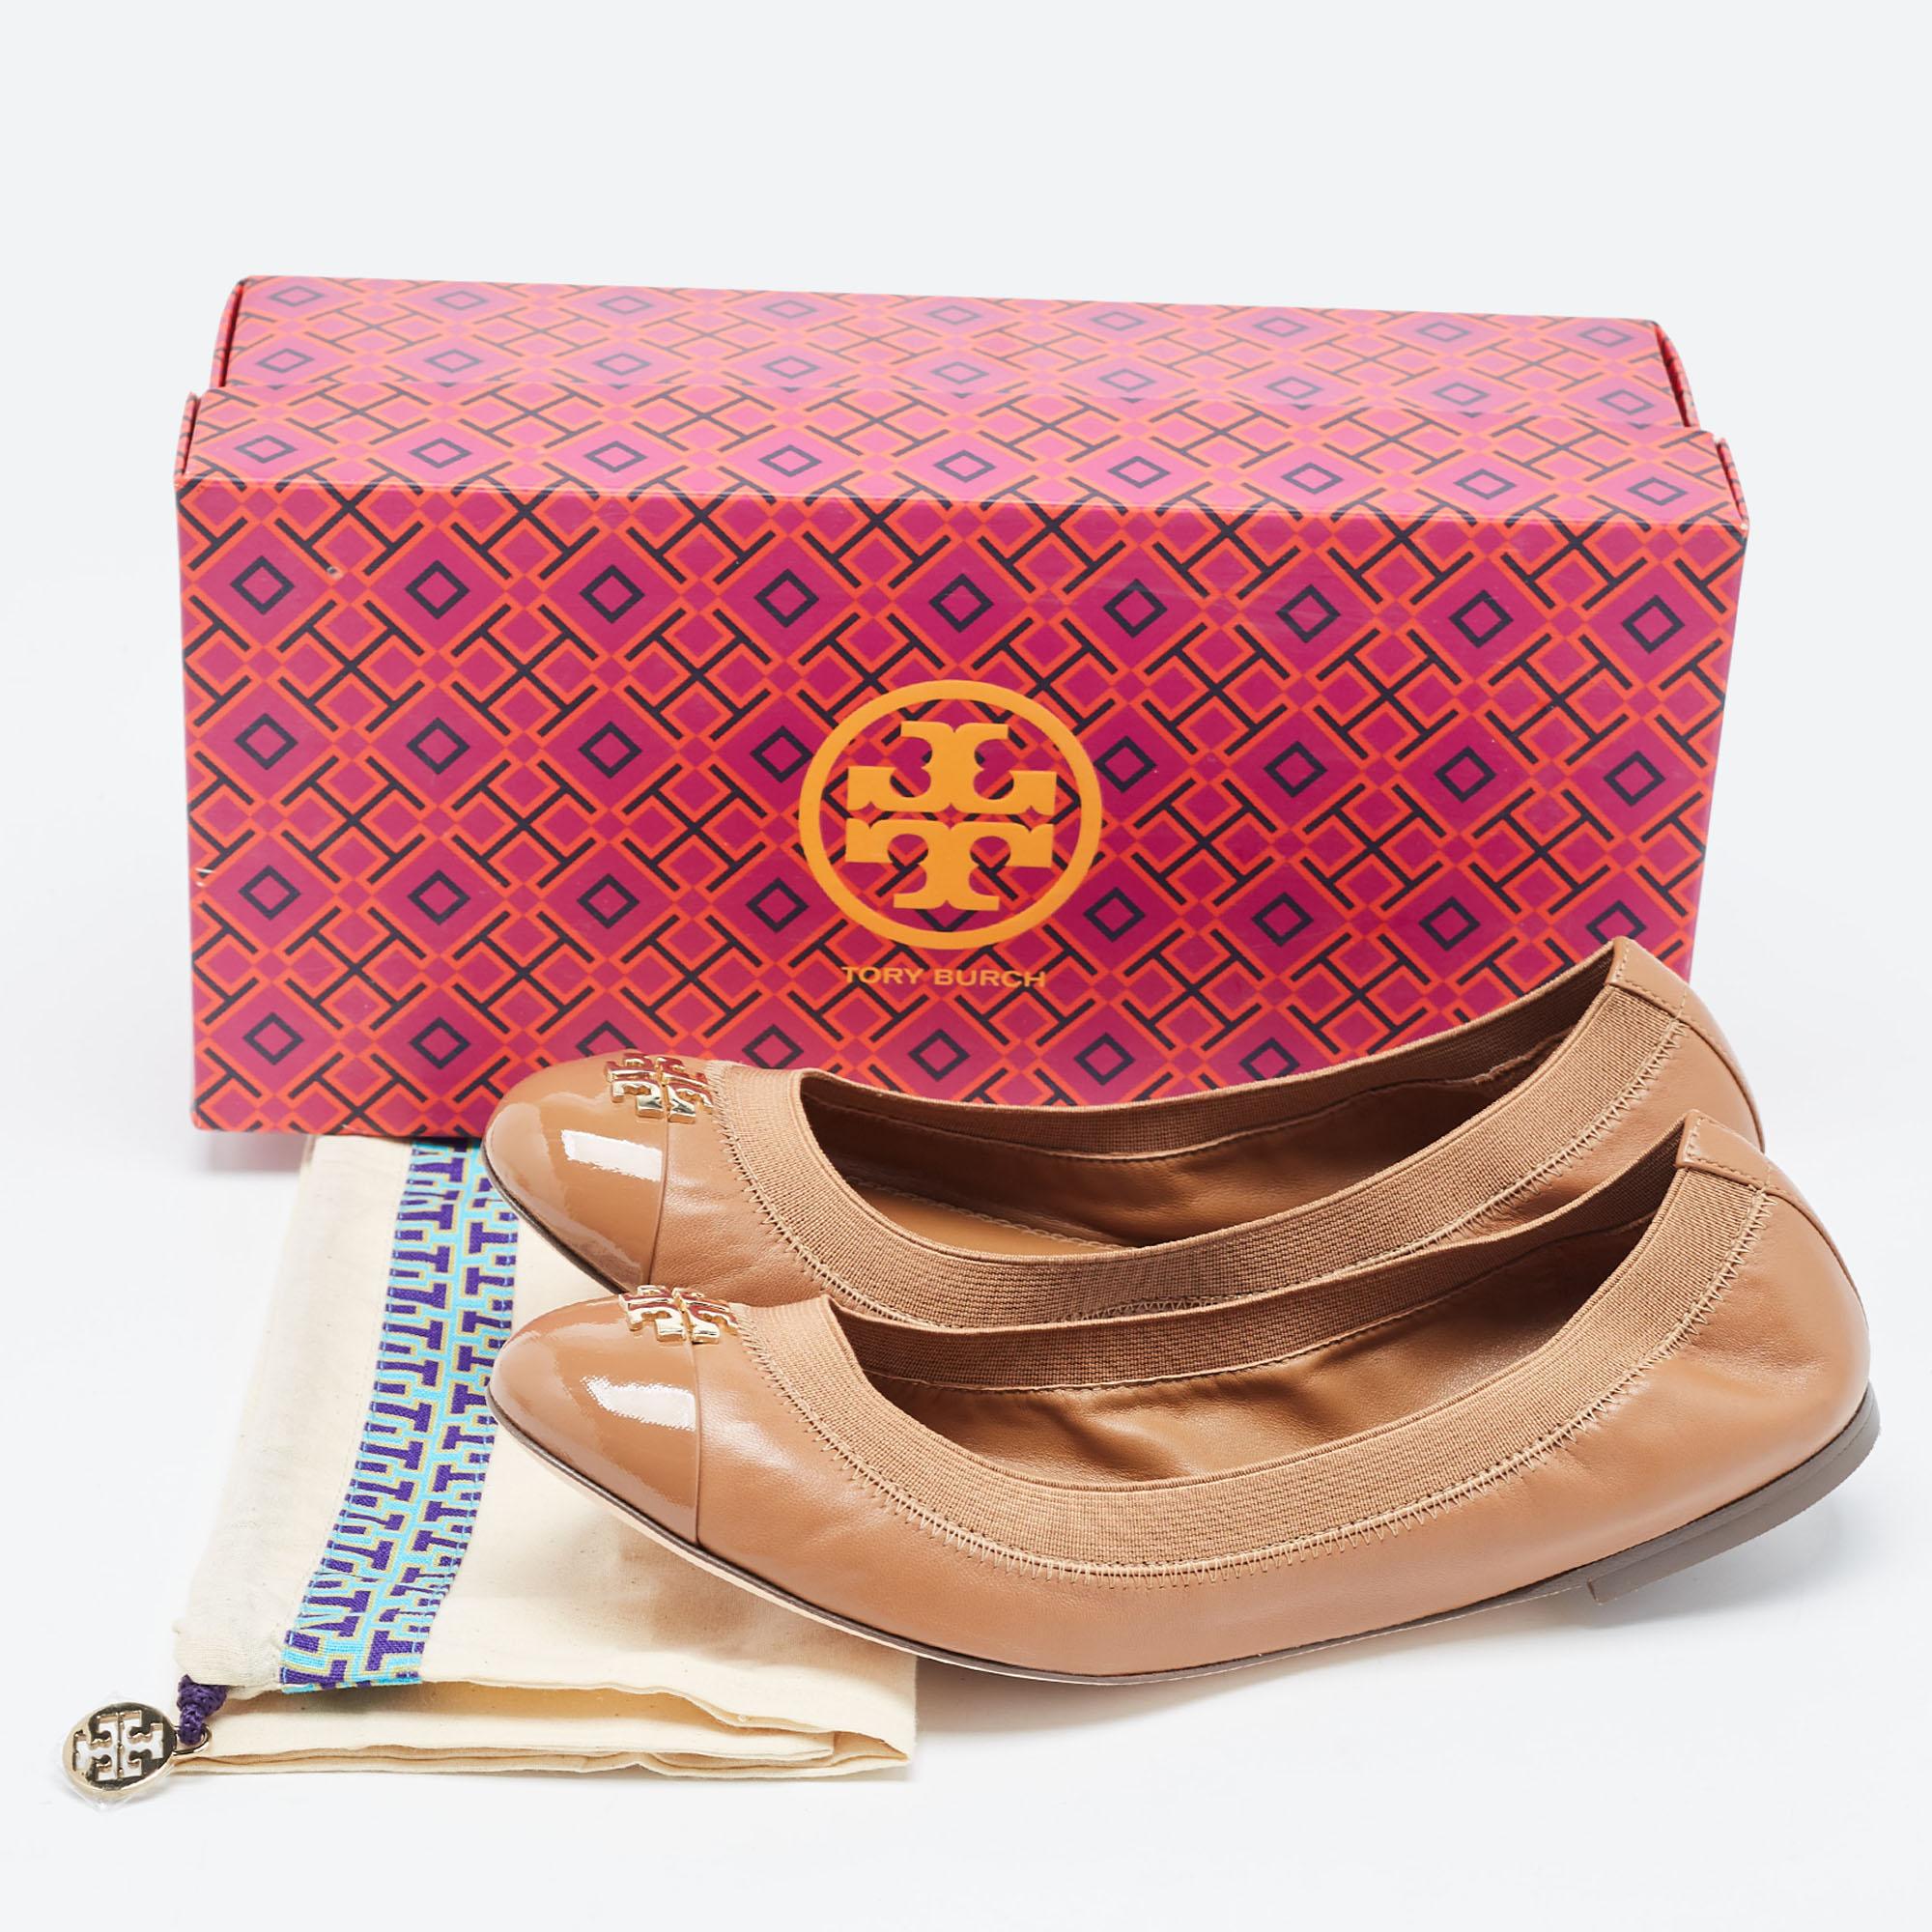 Tory Burch Brown Patent and Leather Jolie Scrunch Ballet Flats Size 39.5 5